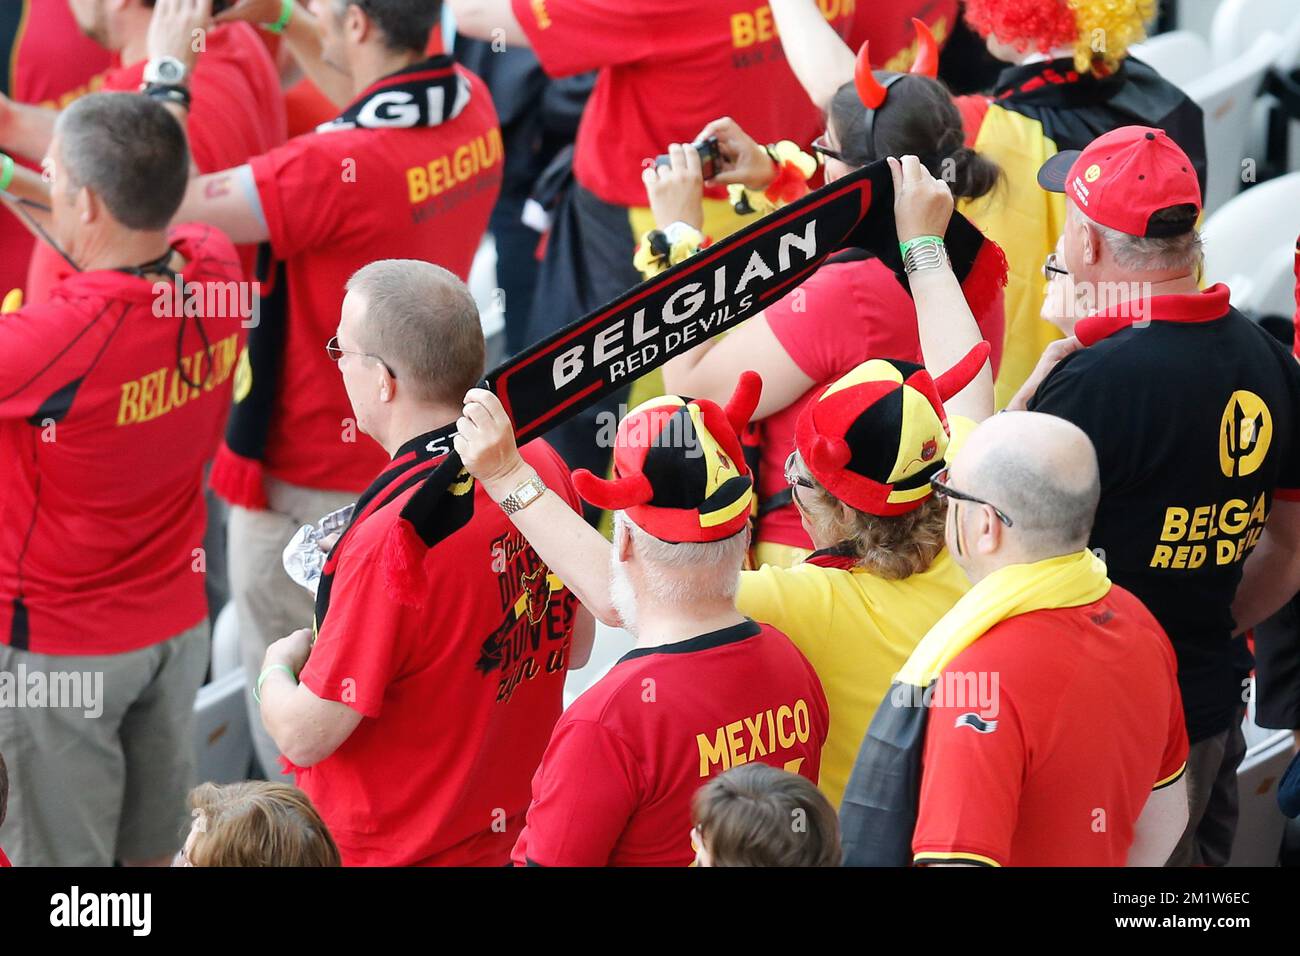 20140626 - SAO PAULO, BRAZIL: Red Devils' supporters pictured before the match between Belgian national soccer team Red Devils and South-Korea, third match in group H, in the stadium 'Arena de Sao Paulo', in Itaquera, Sao Paulo, Brazil, during the 2014 FIFA World Cup, Thursday 26 June 2014. The Red Devils lead their group H with two victories. BELGA PHOTO BRUNO FAHY Stock Photo